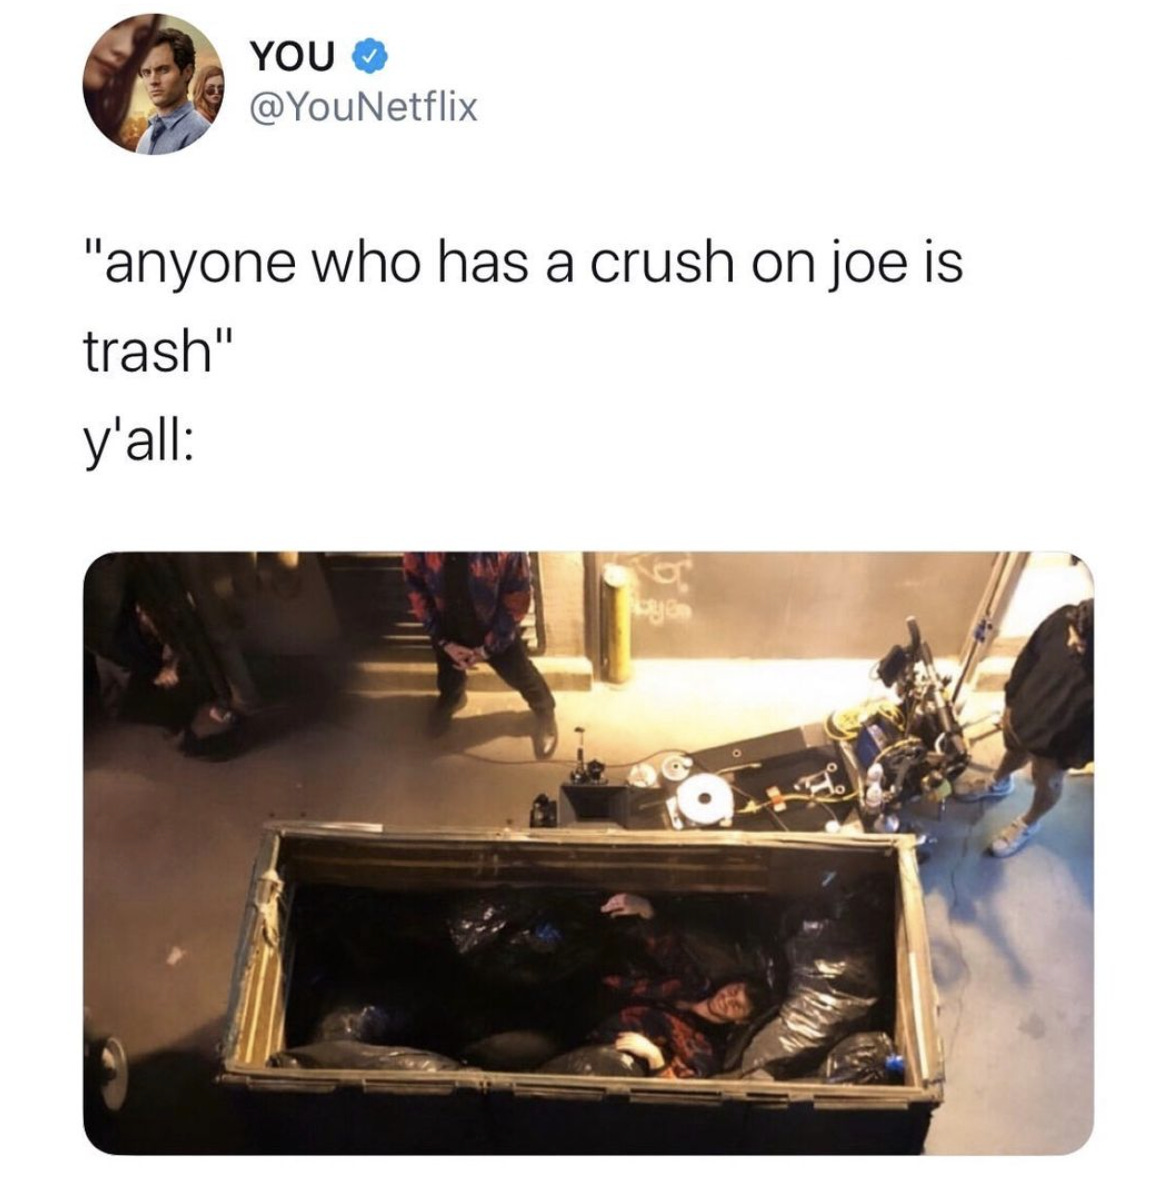 From the “YOU” IG page: “anyone who has a crush on joe is trash” Ya’ll: photo of a person laying happily in a dumpster